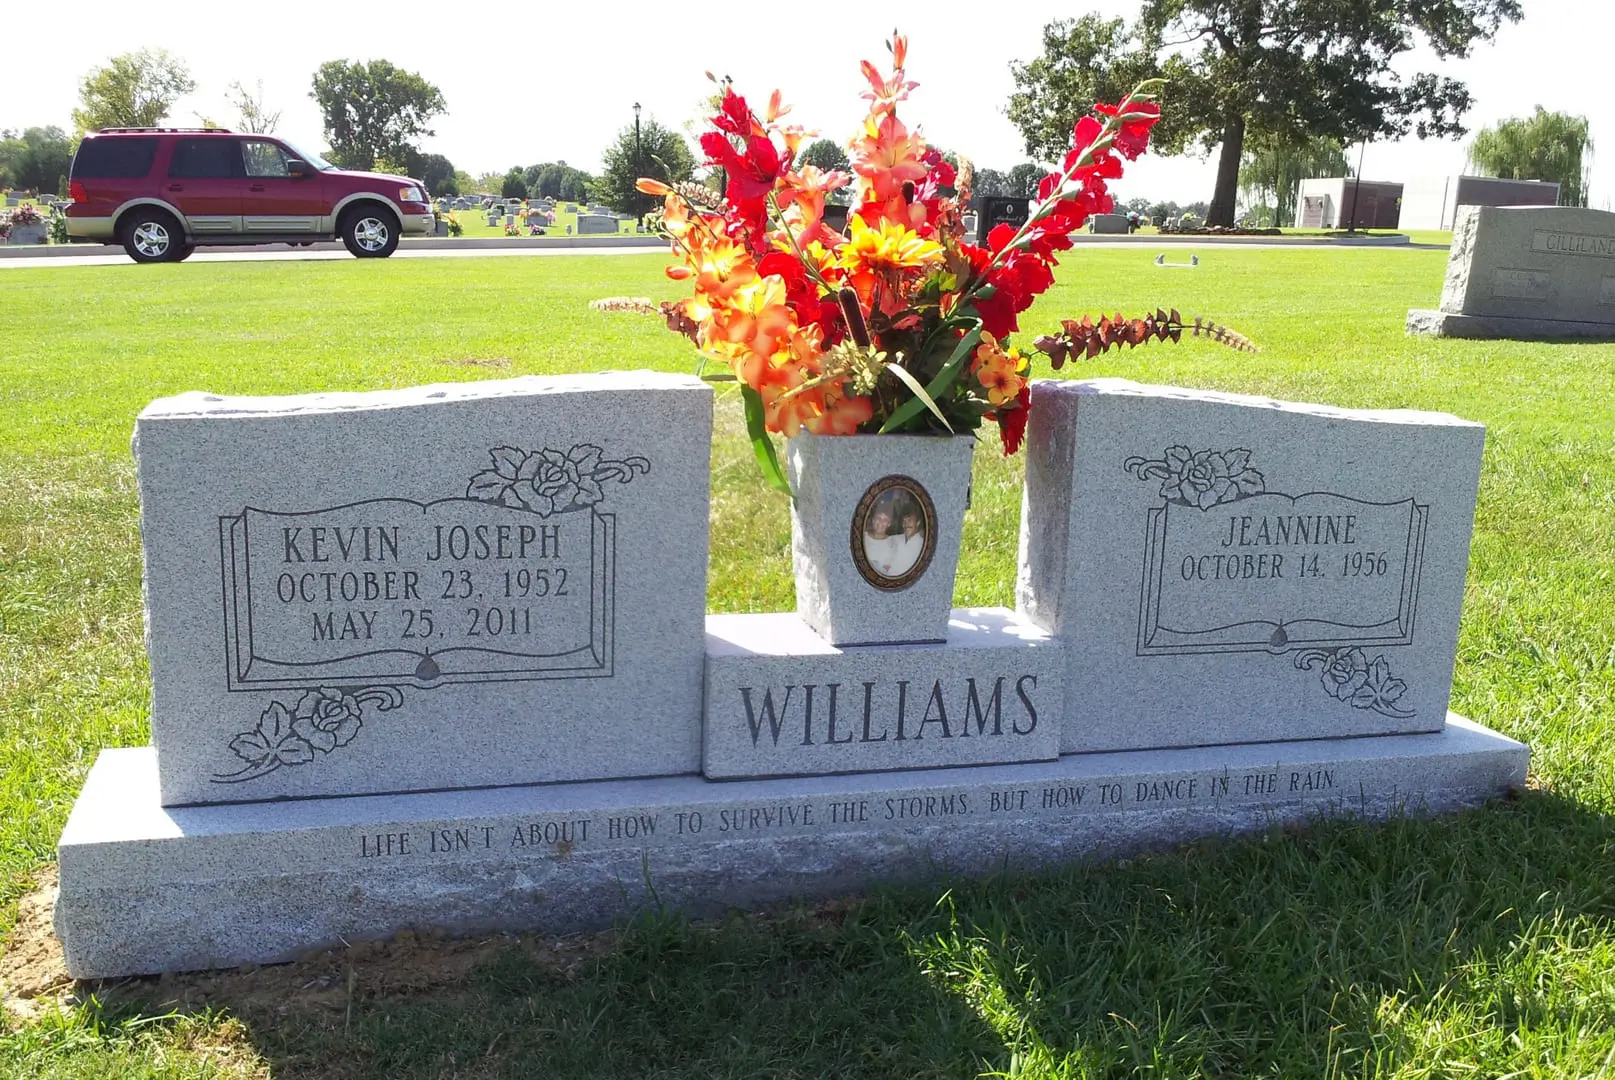 A memorial slab for Kevin Joseph and Jeannine